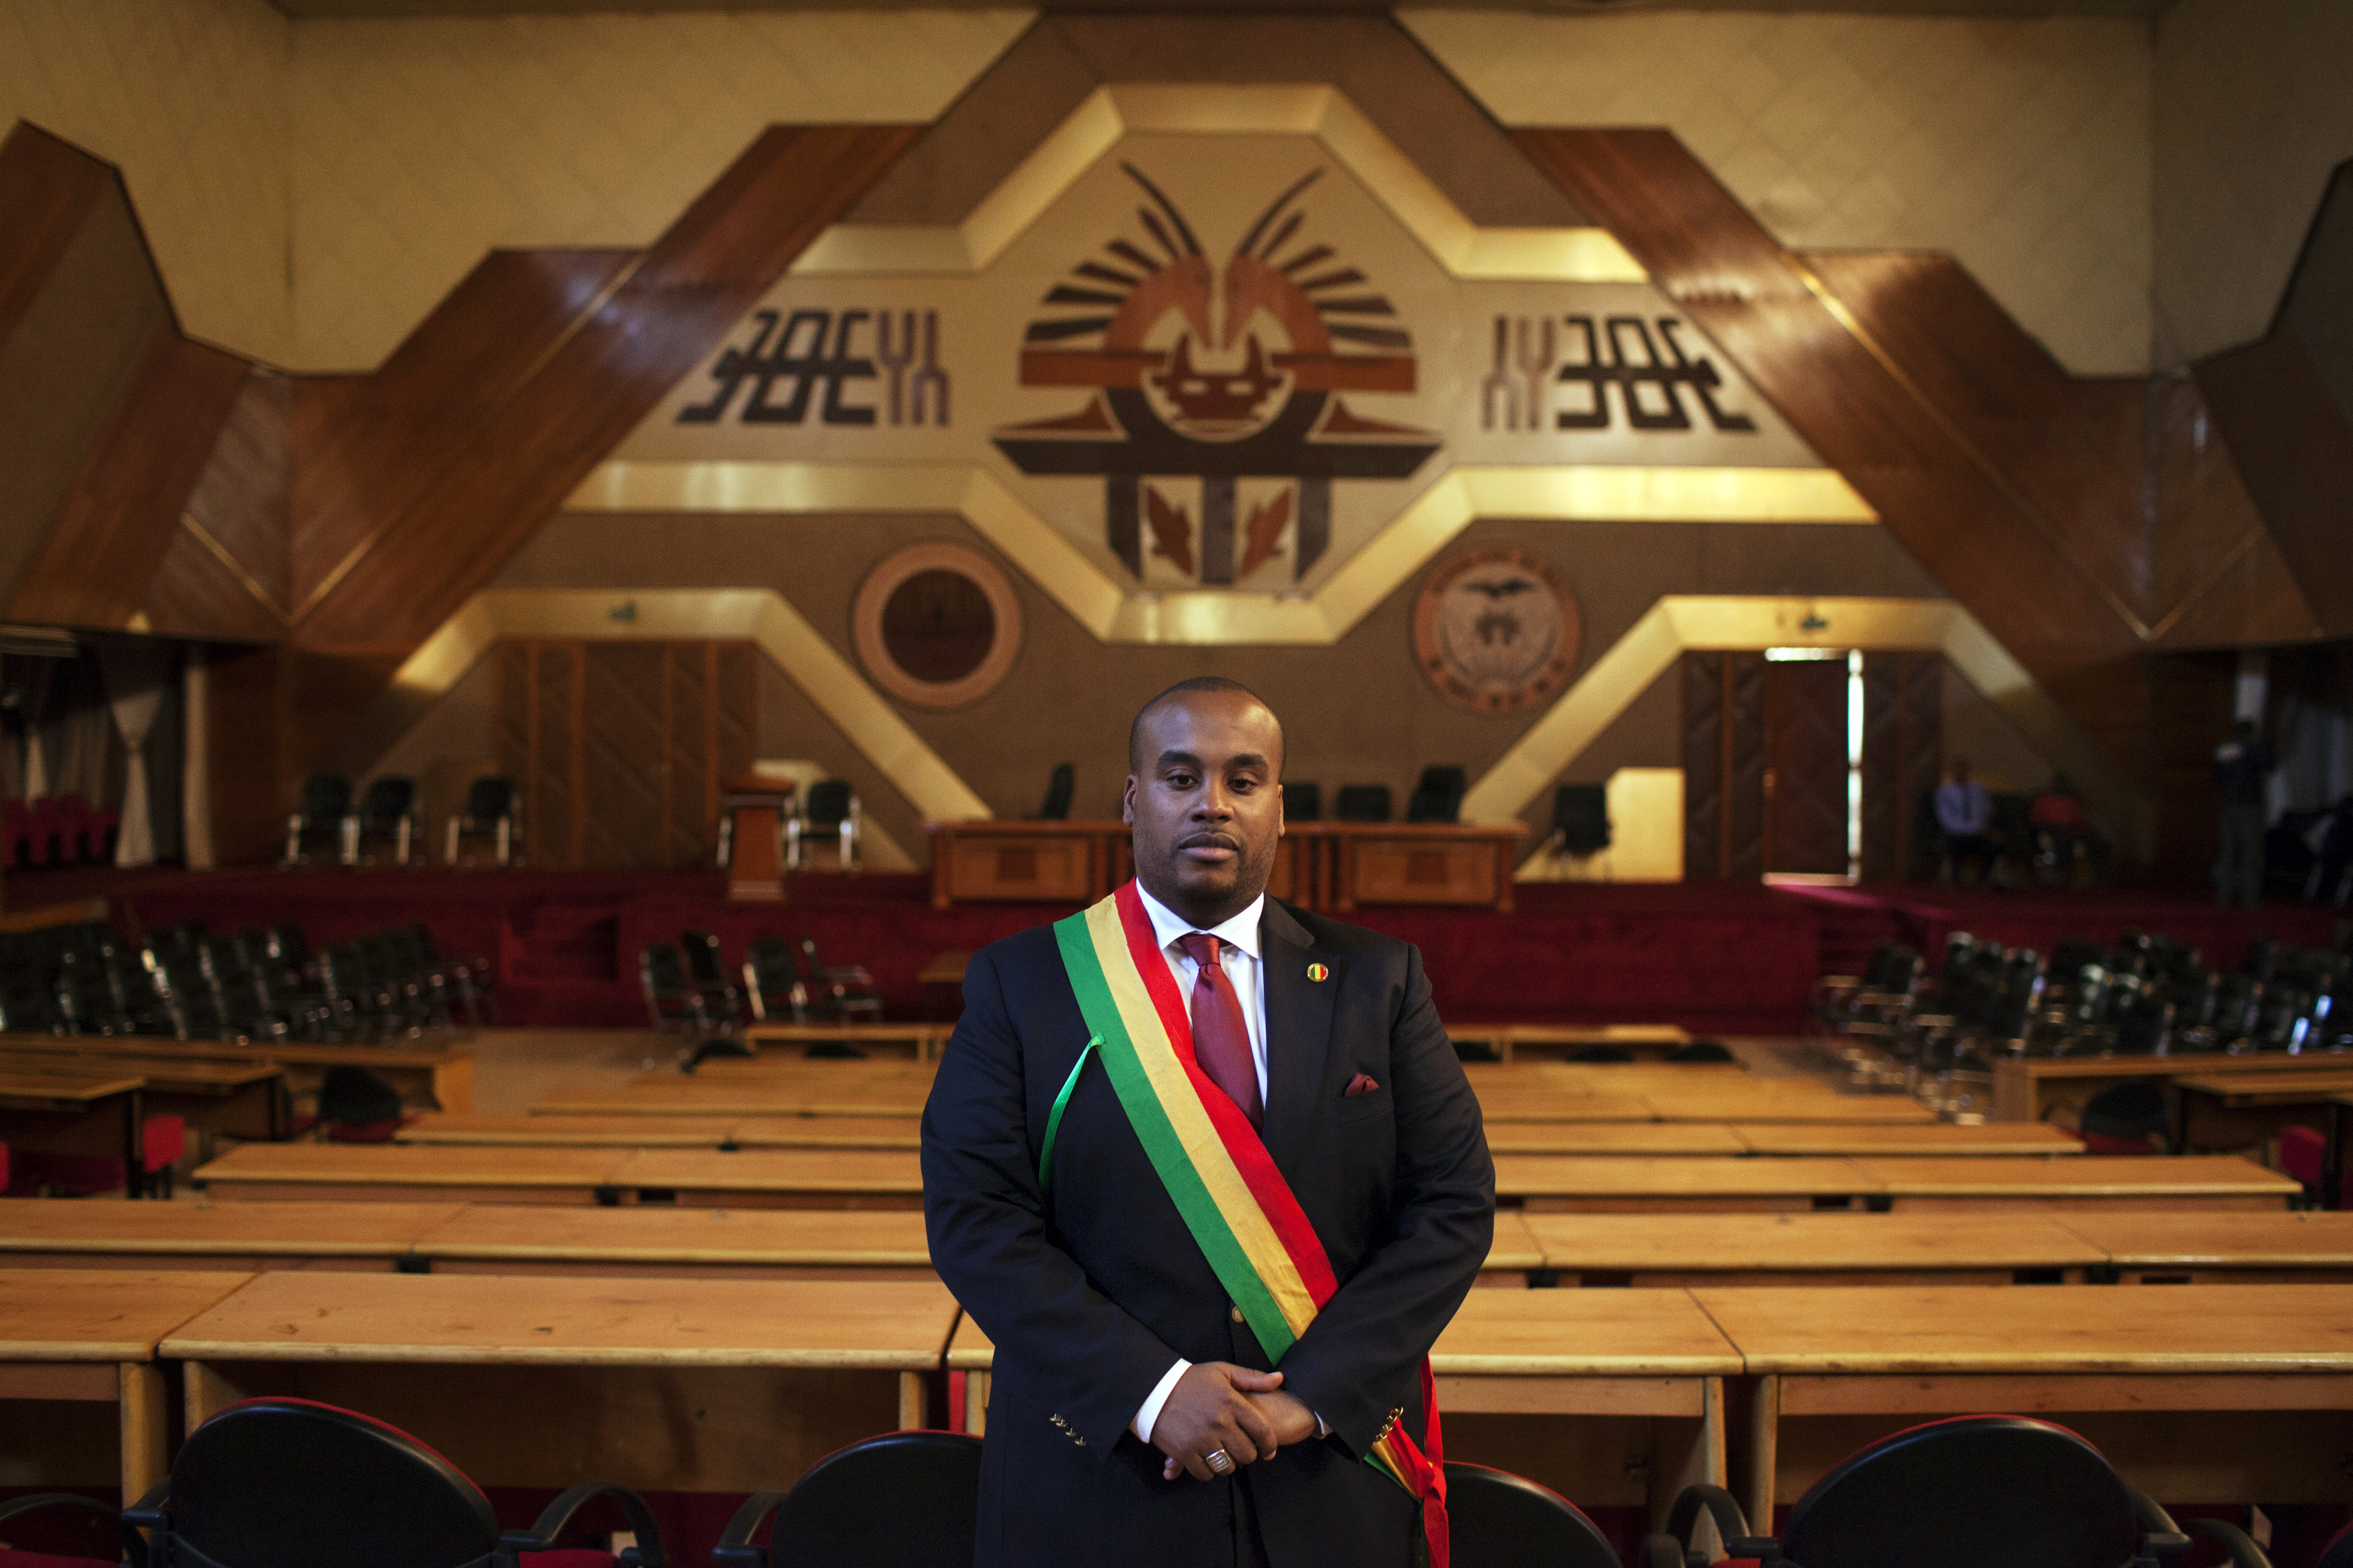 Karim Keita, member of parliament and the son of Malian President Keita, poses for a picture in the parliament's main hall in Bamako